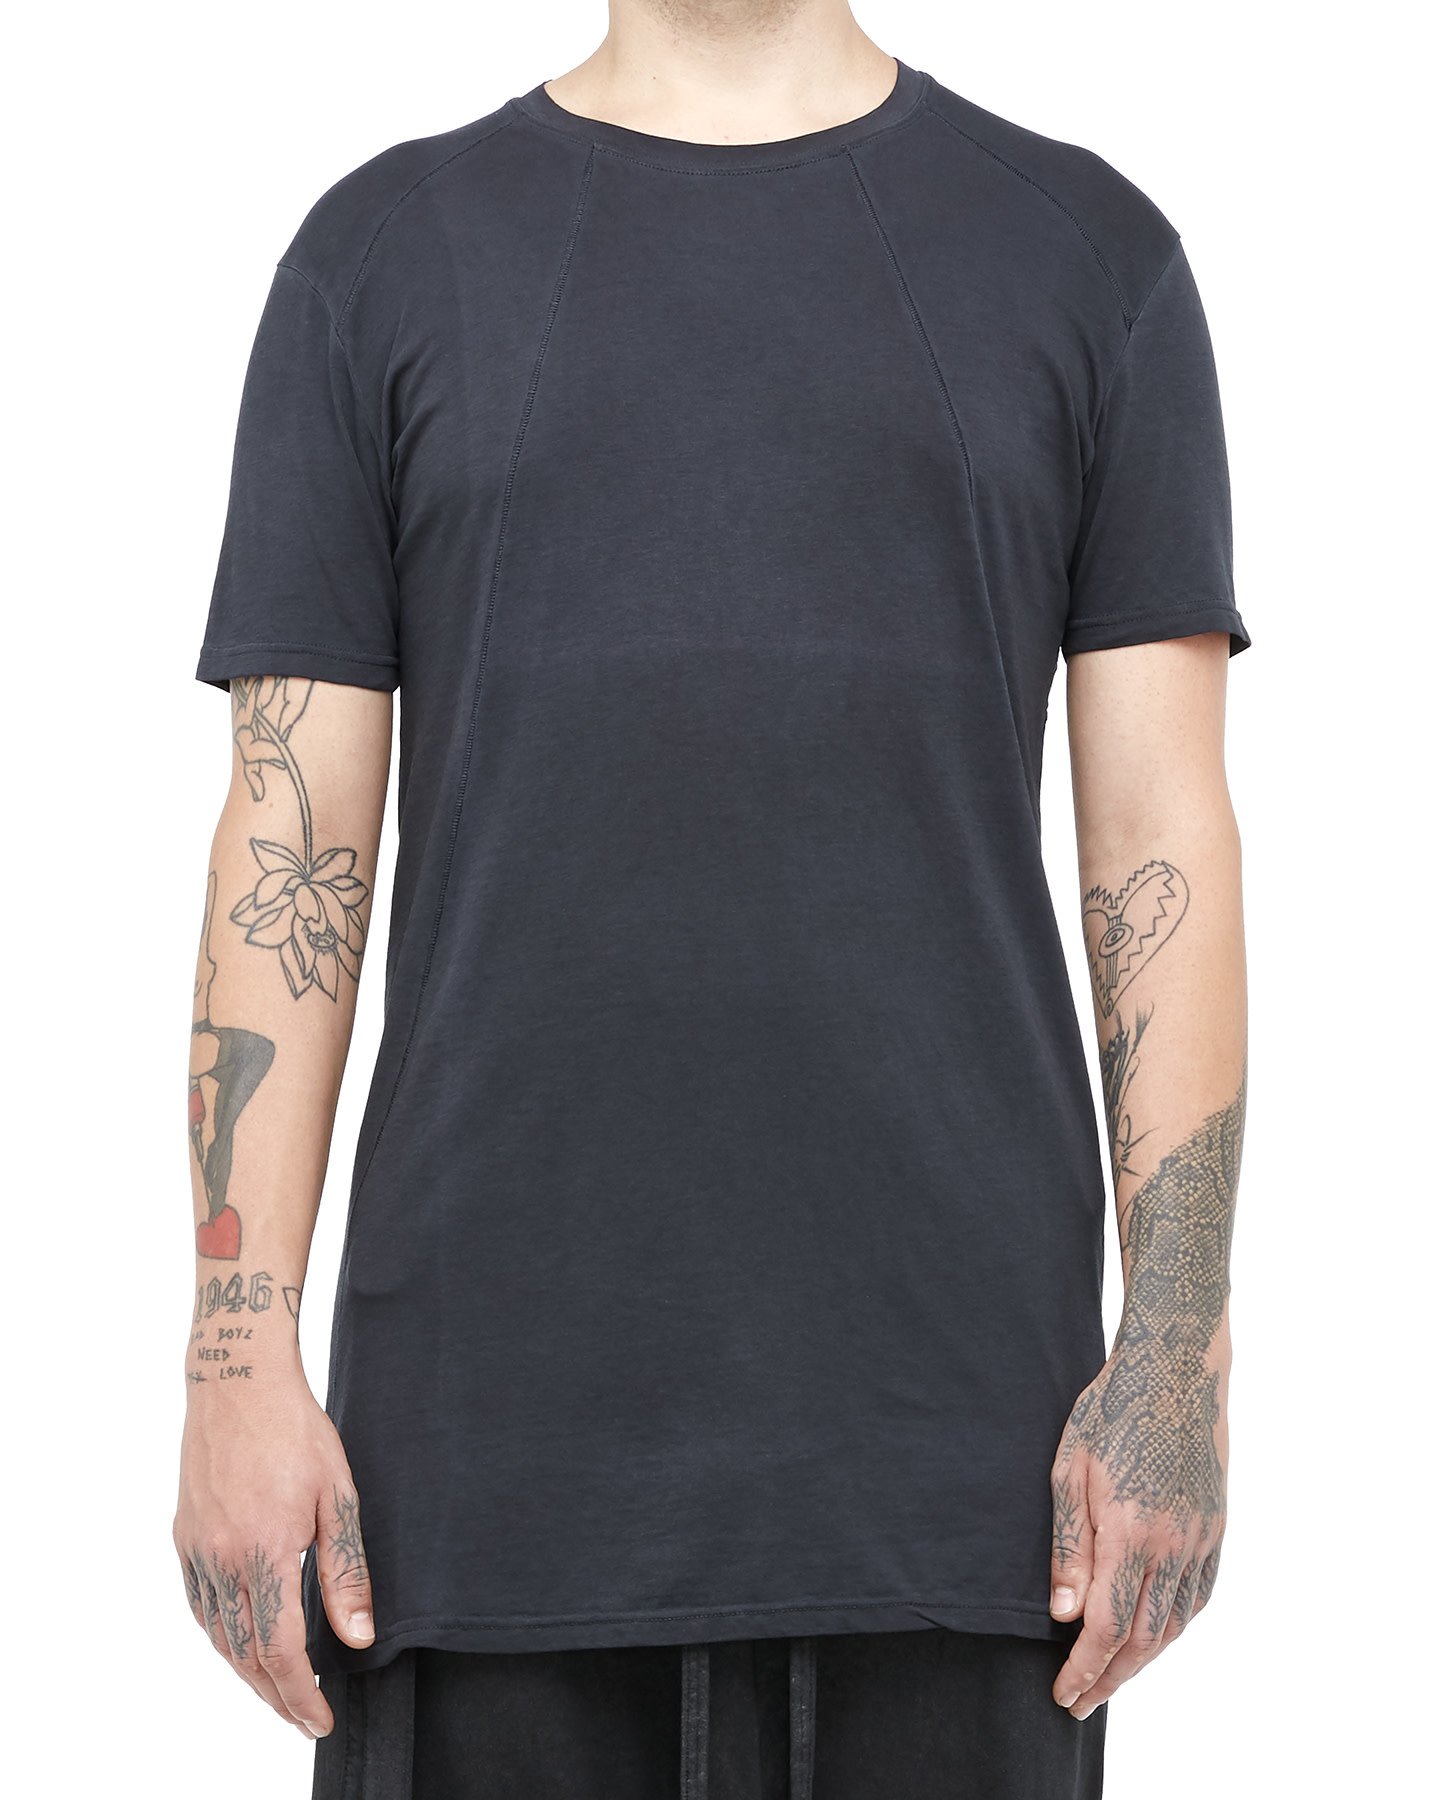 FITTED COLD DYE SEAM DETAIL COTTON T-SHIRT